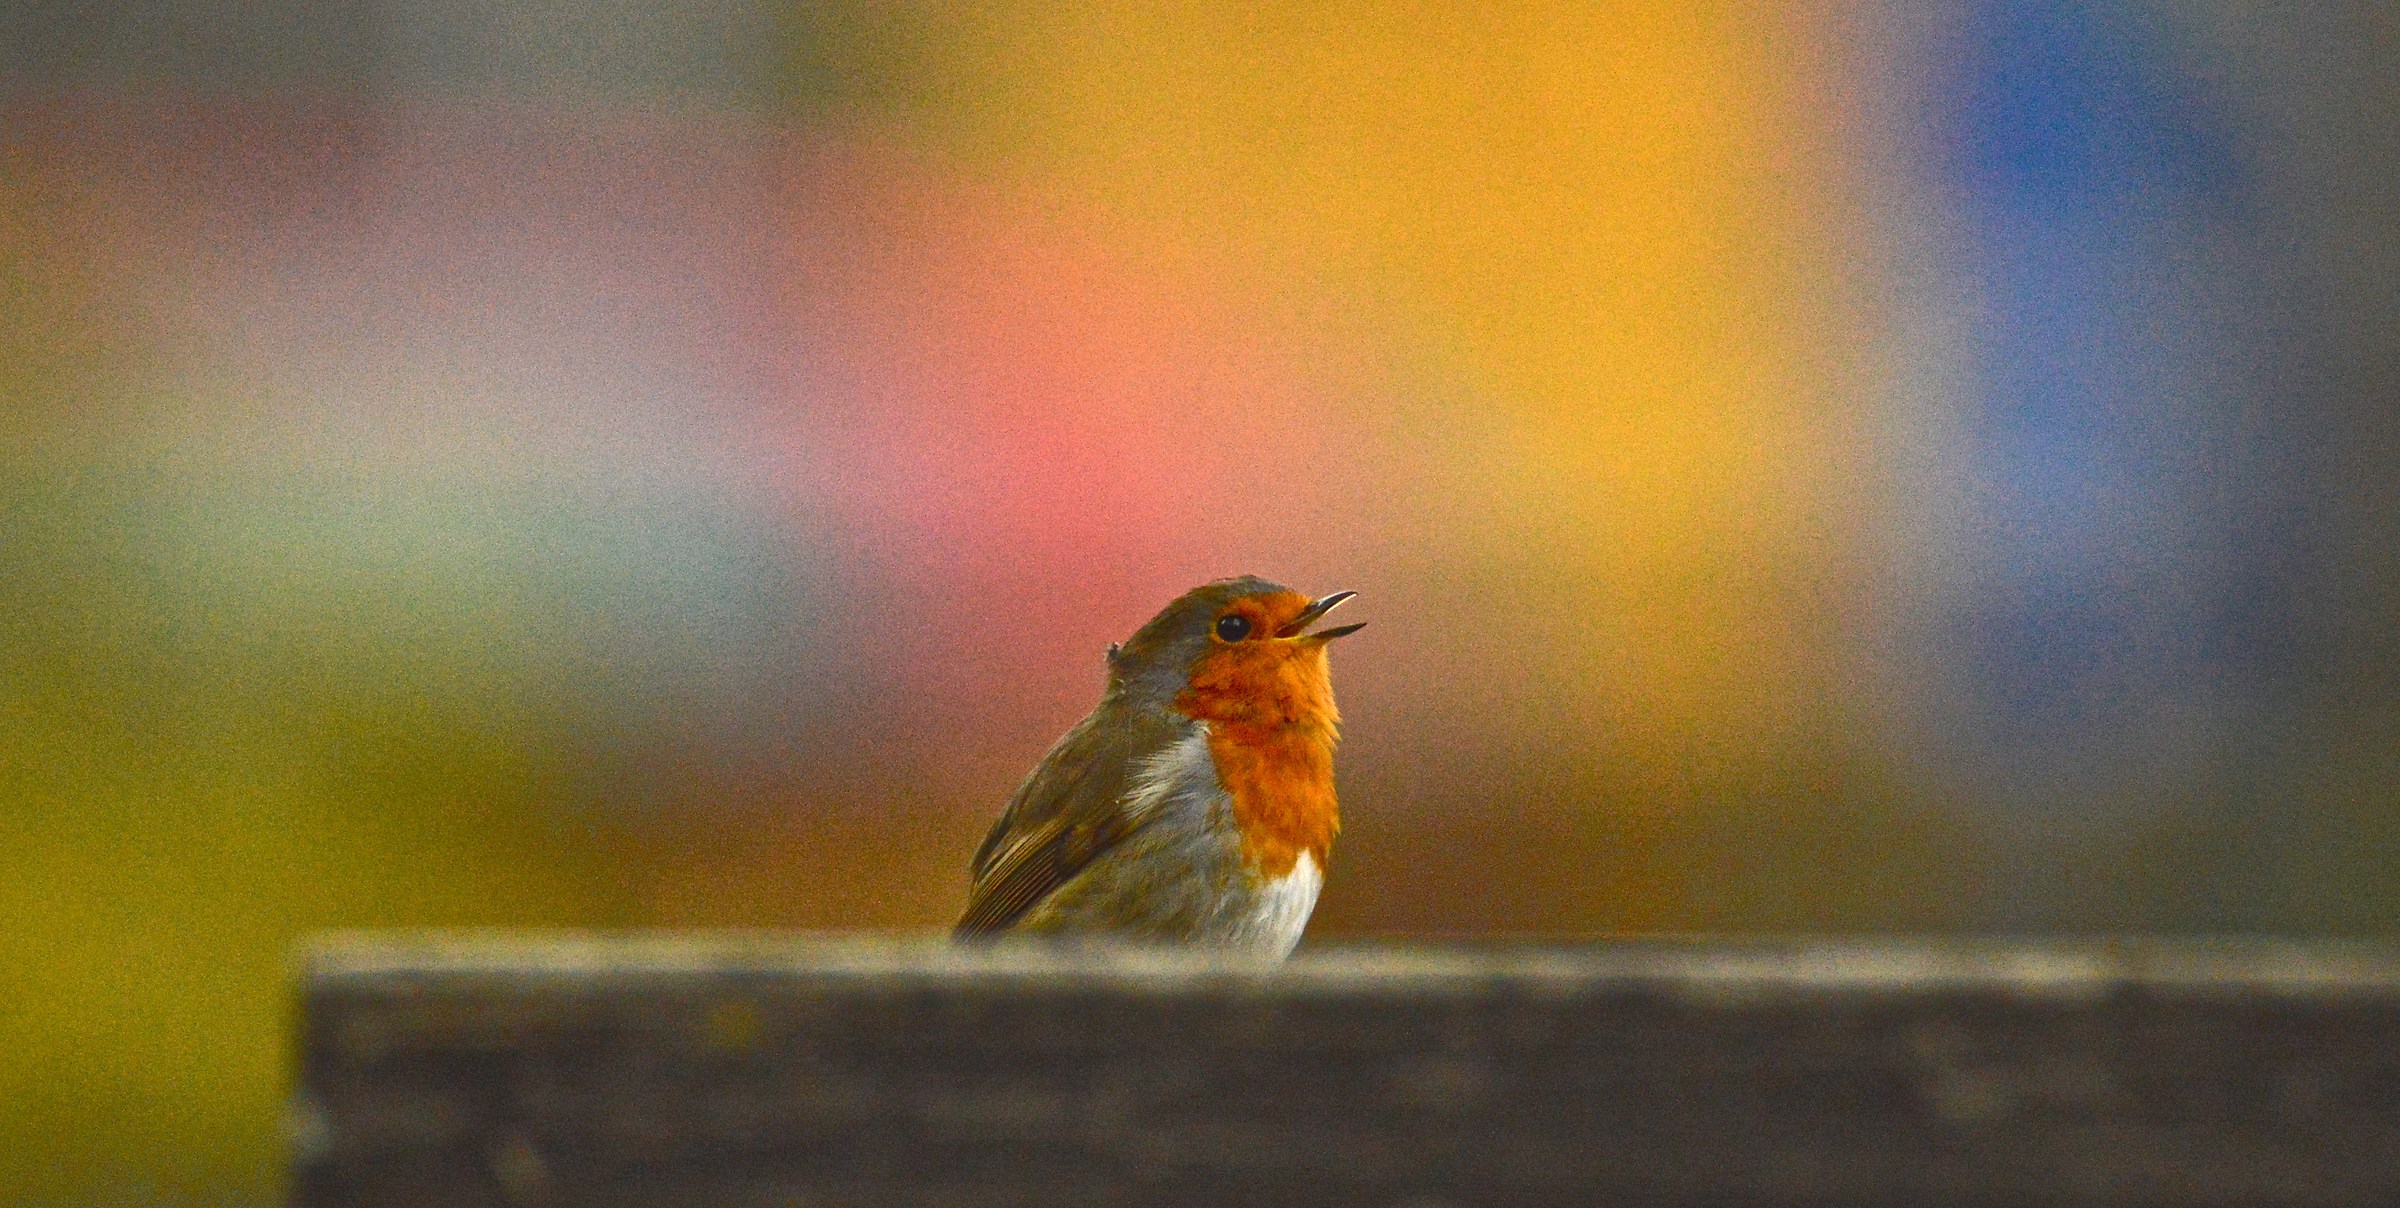 The song of the robin...